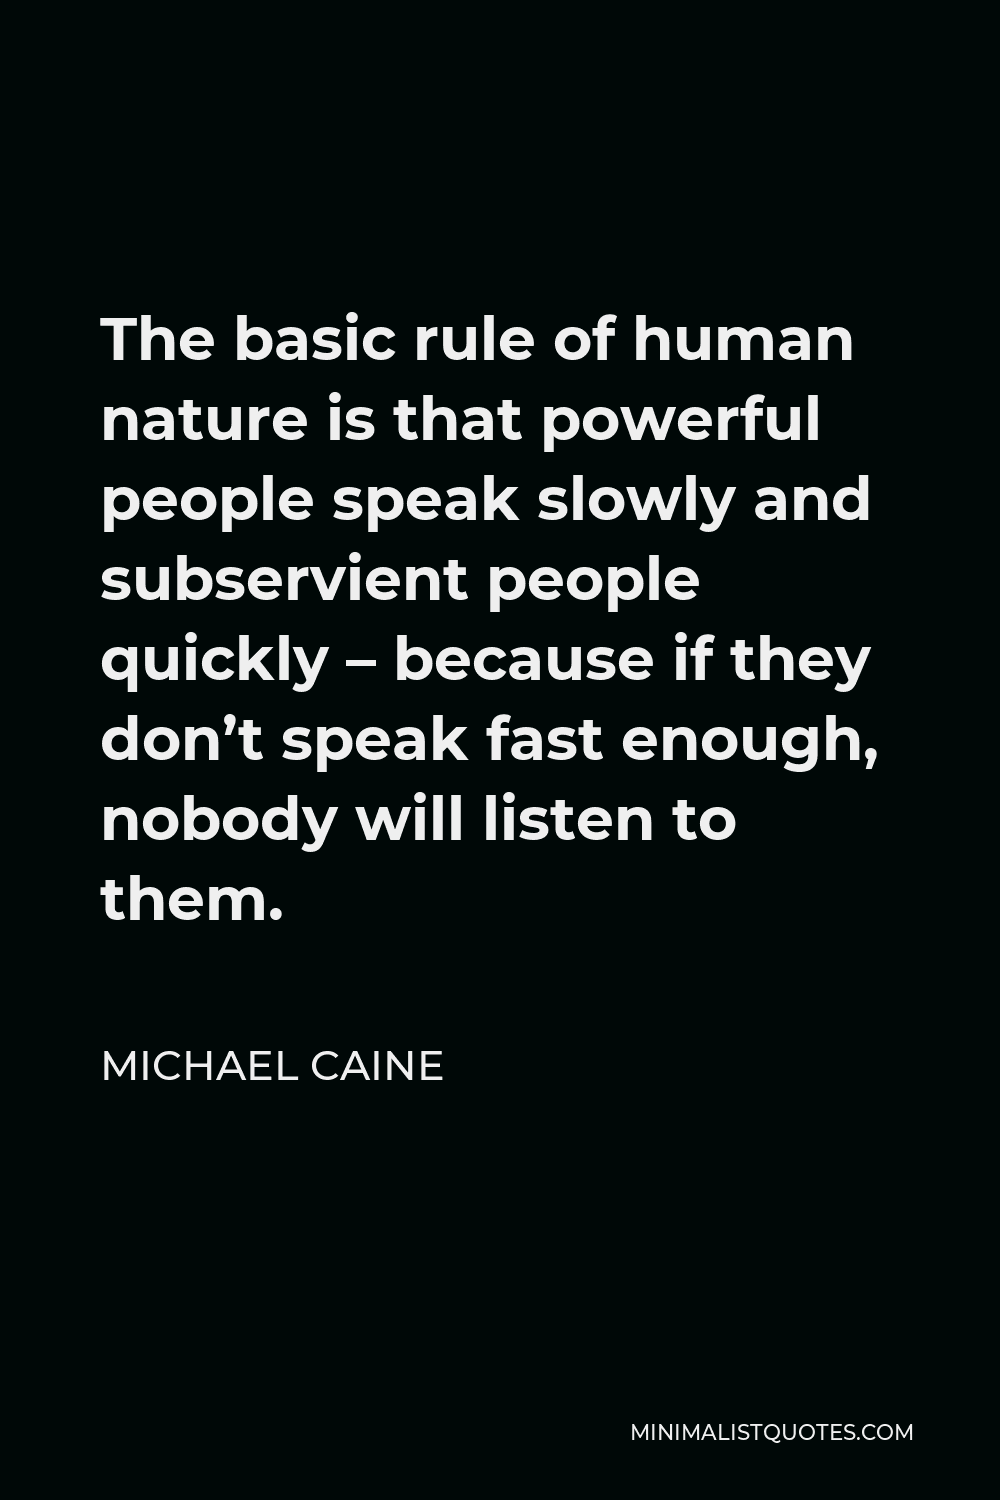 Michael Caine Quote - The basic rule of human nature is that powerful people speak slowly and subservient people quickly – because if they don’t speak fast enough, nobody will listen to them.